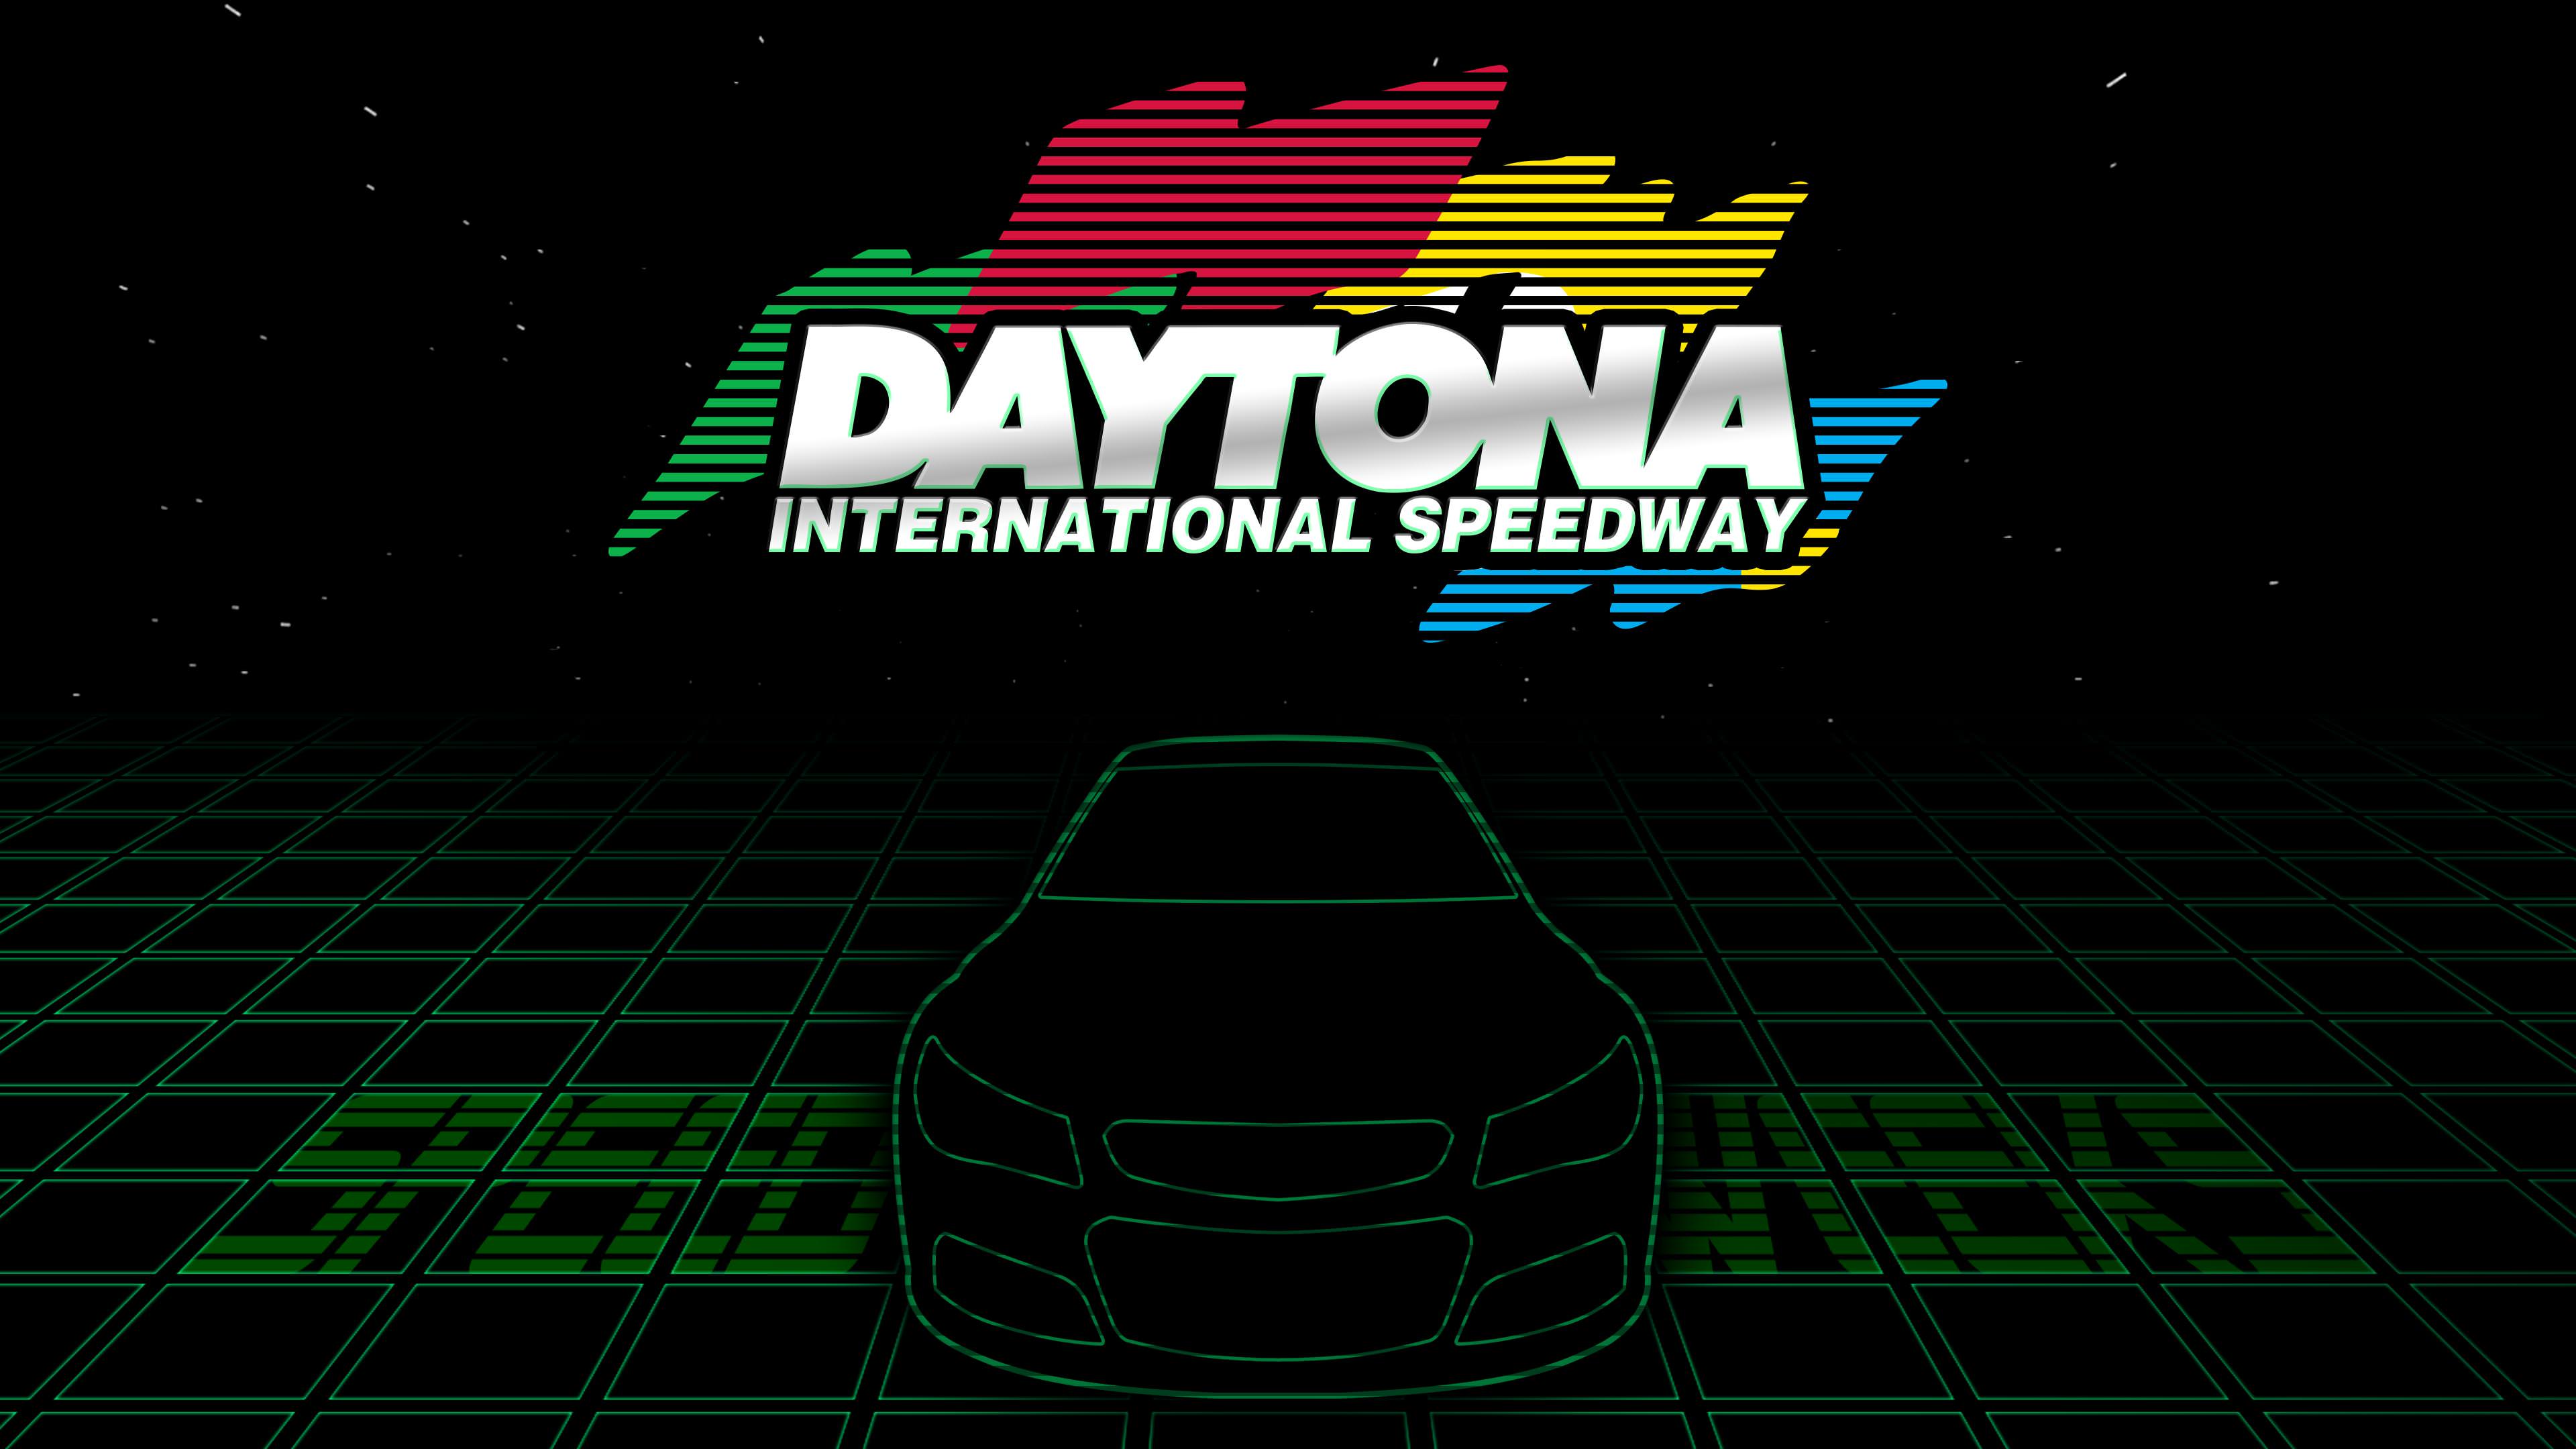 Here's this Outrun Daytona wallpaper I made